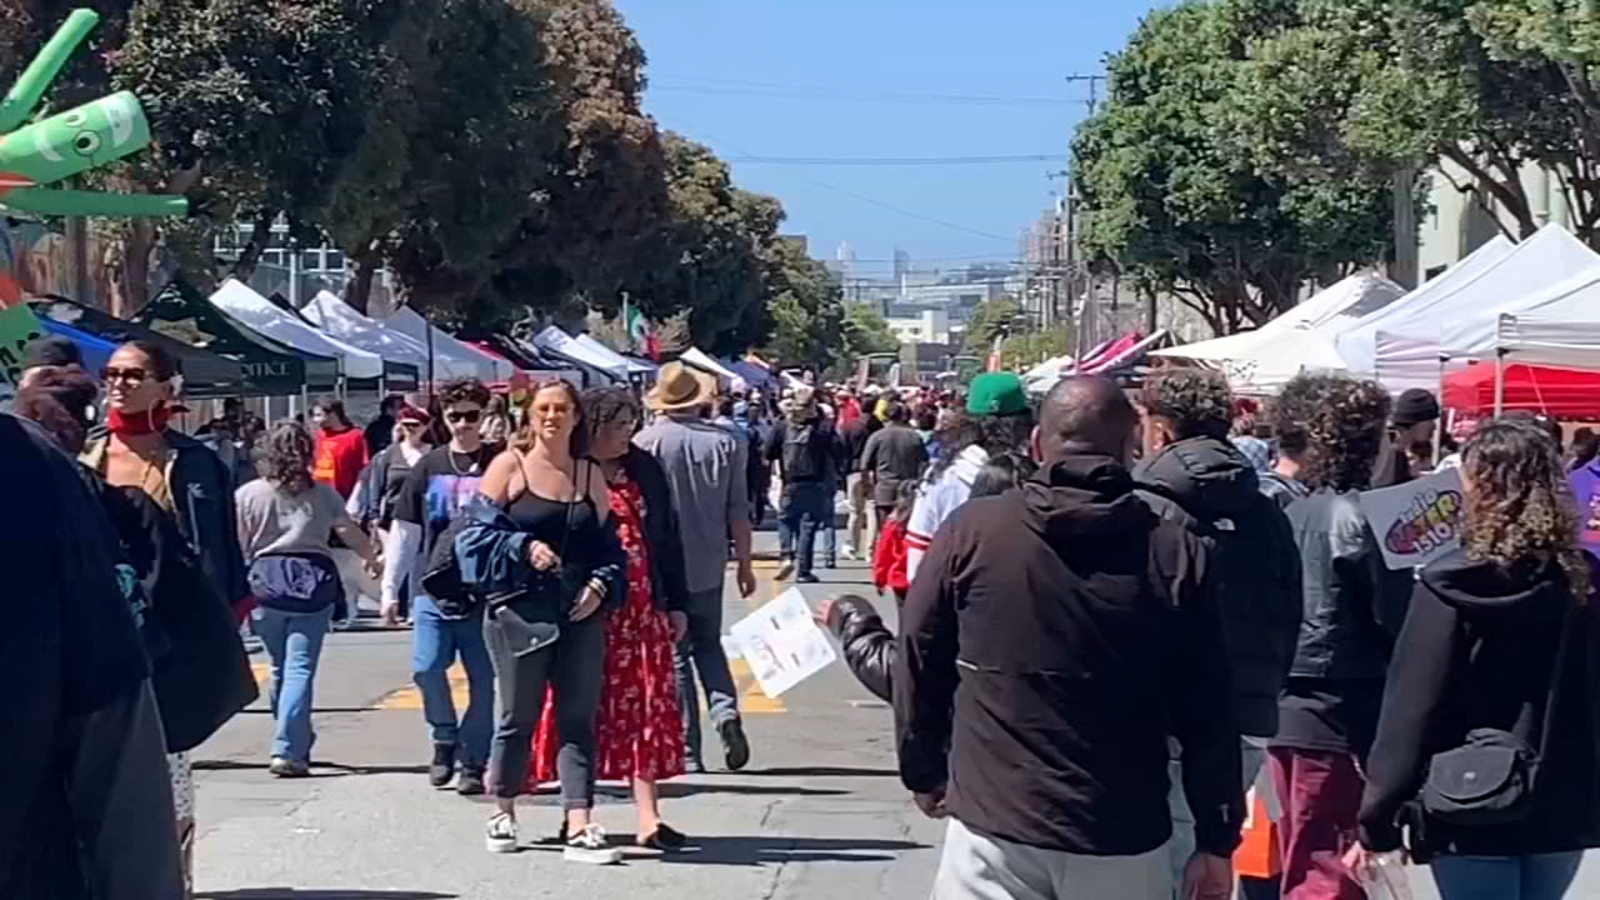 San Francisco celebrates another year of Carnaval in Mission District, highlighting Latin and Indigenous community [Video]